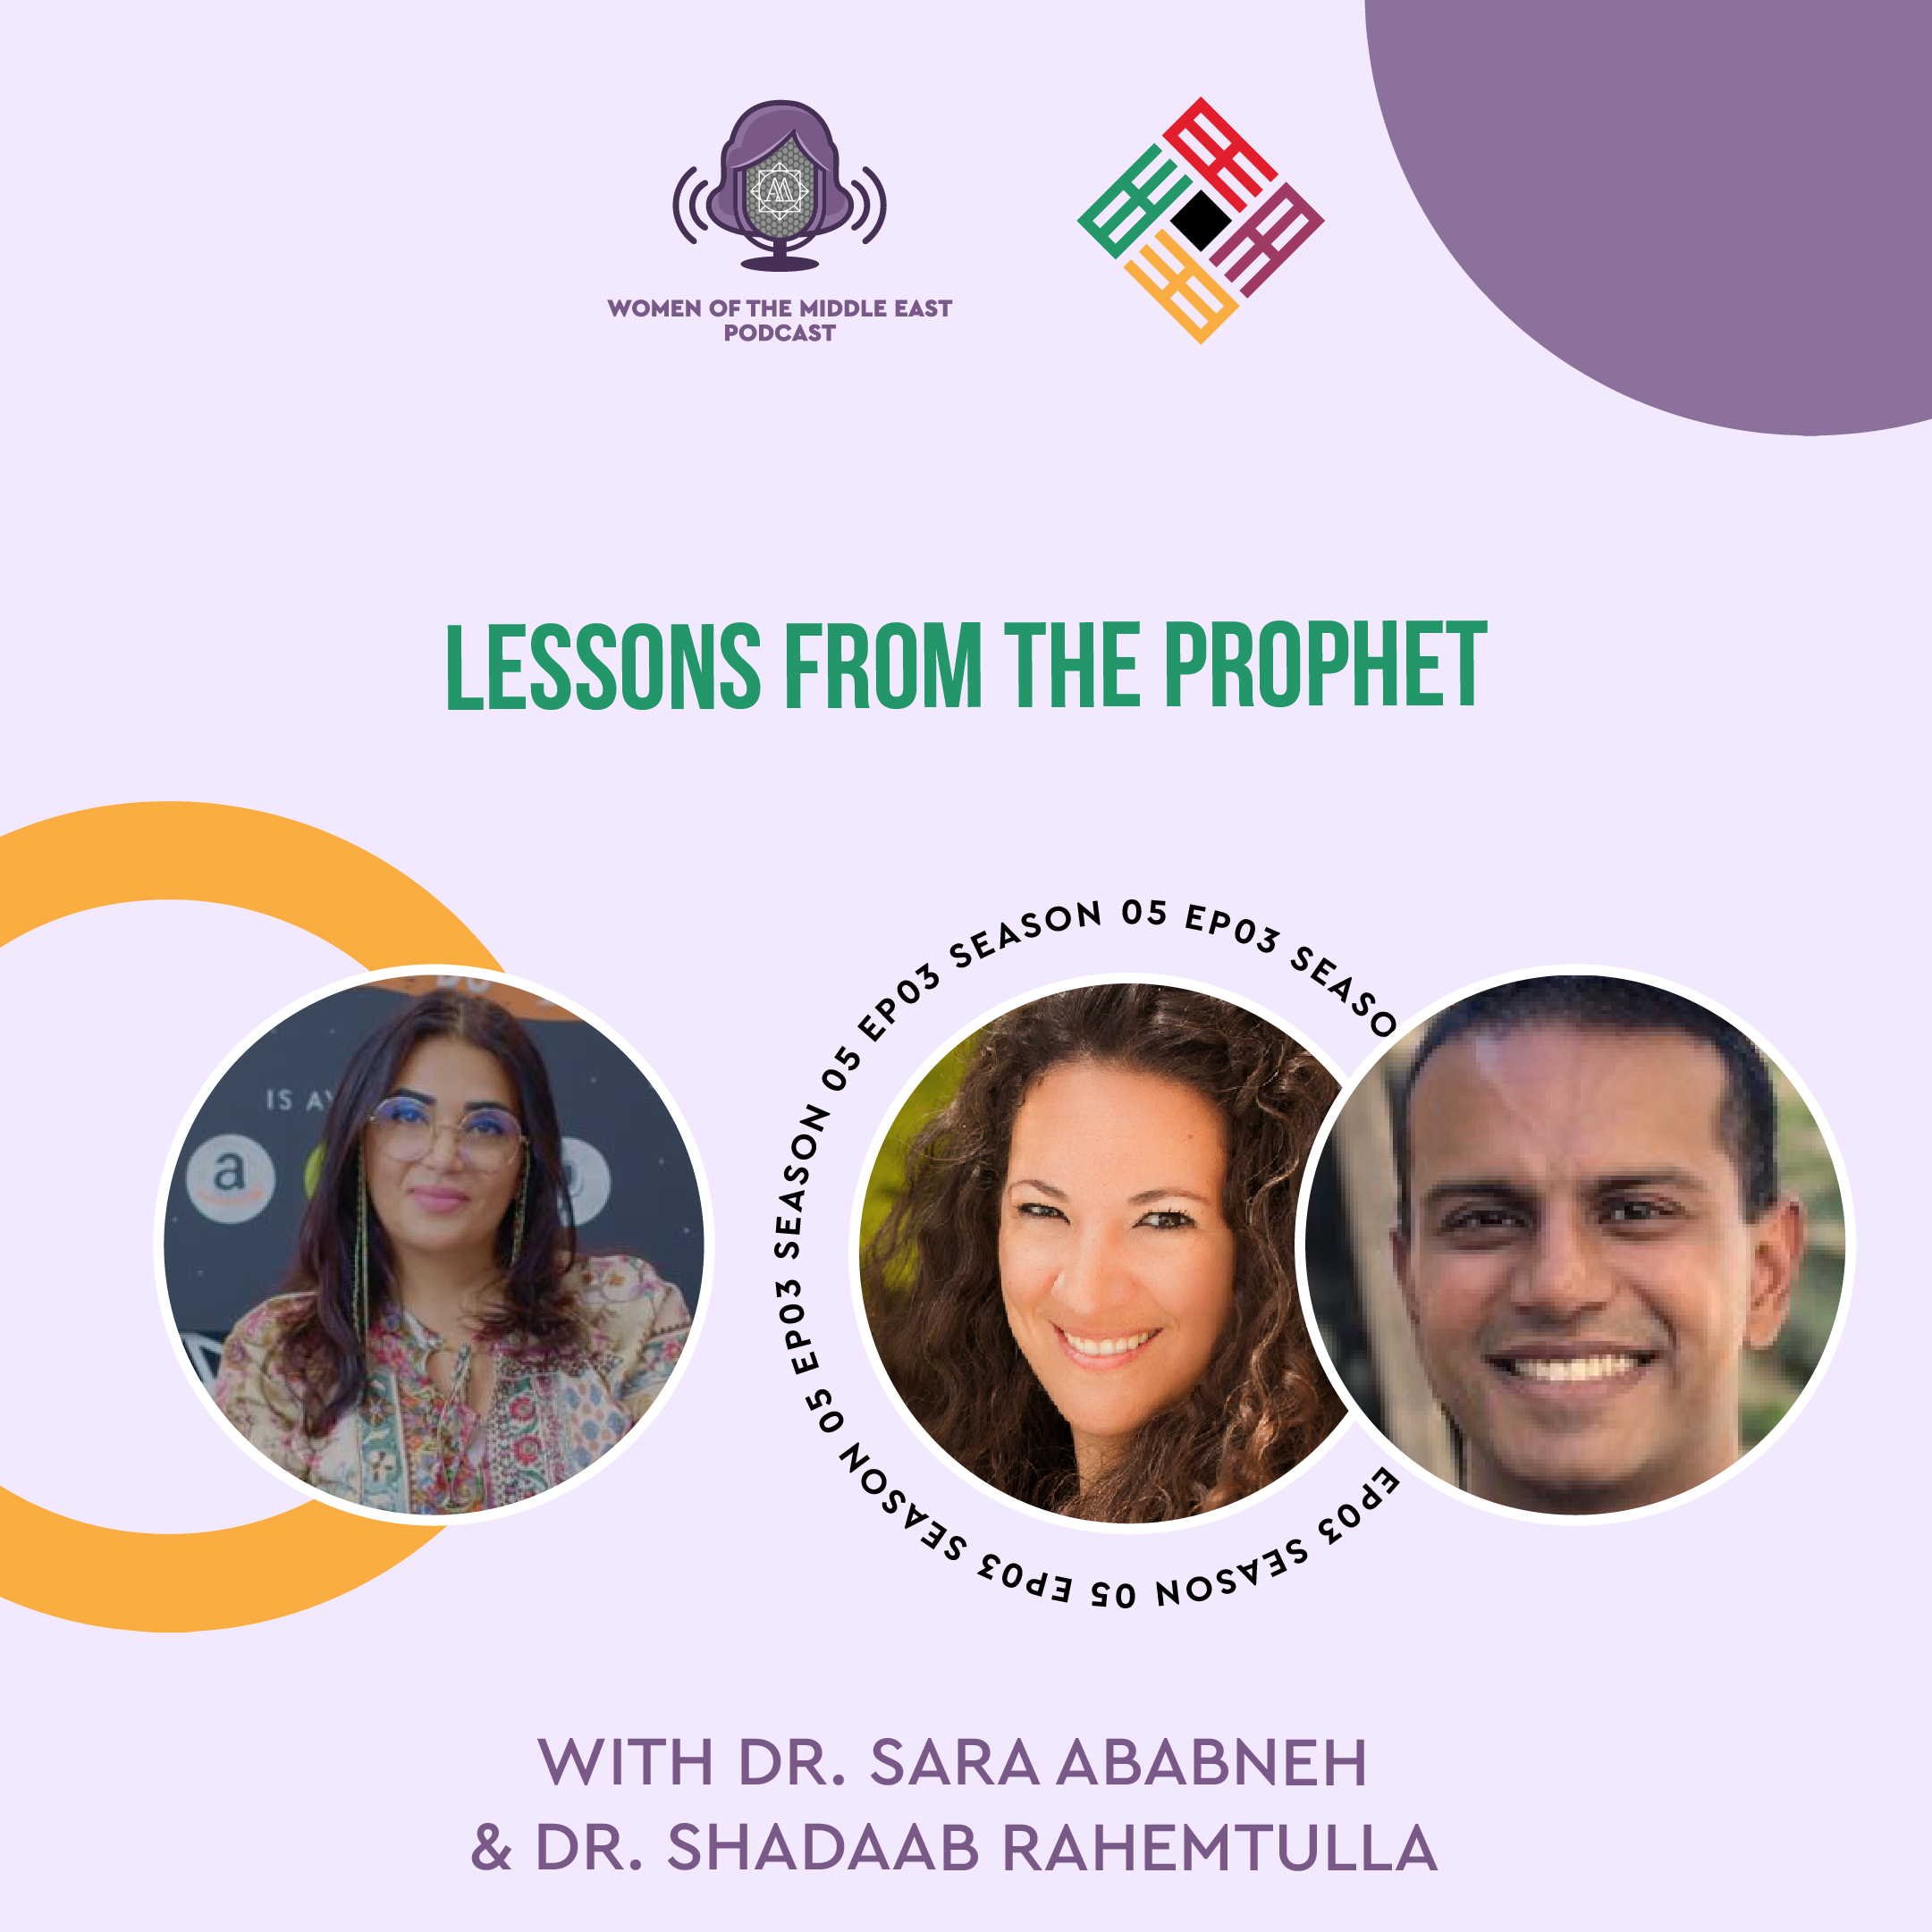 S5 E3: Lessons From the Prophet featuring Dr. Sara Ababneh & Dr. Shadaab Rahemtulla